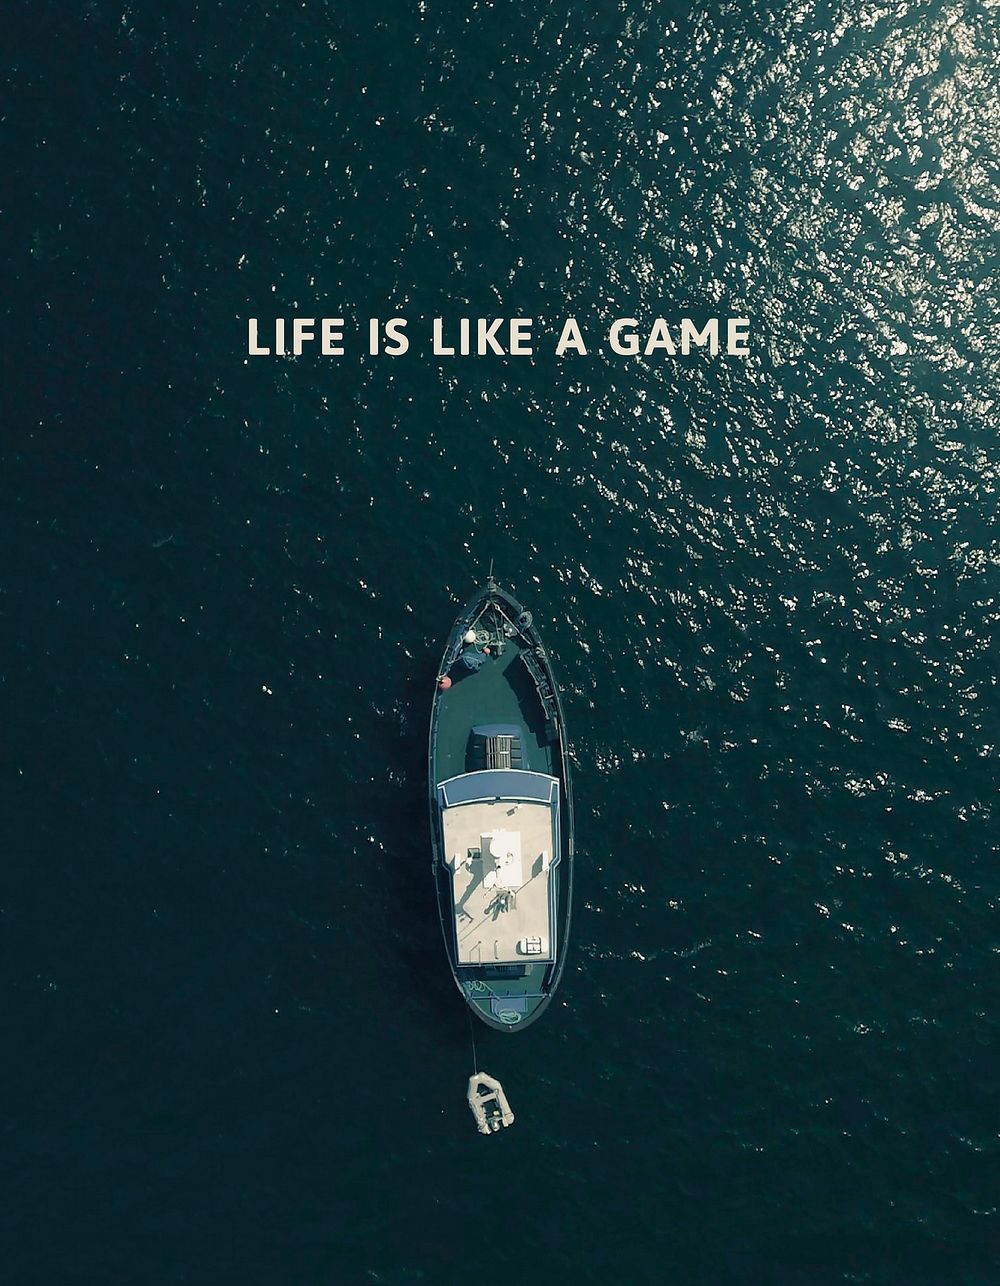 Ocean aesthetic flyer template, life is like a game vector